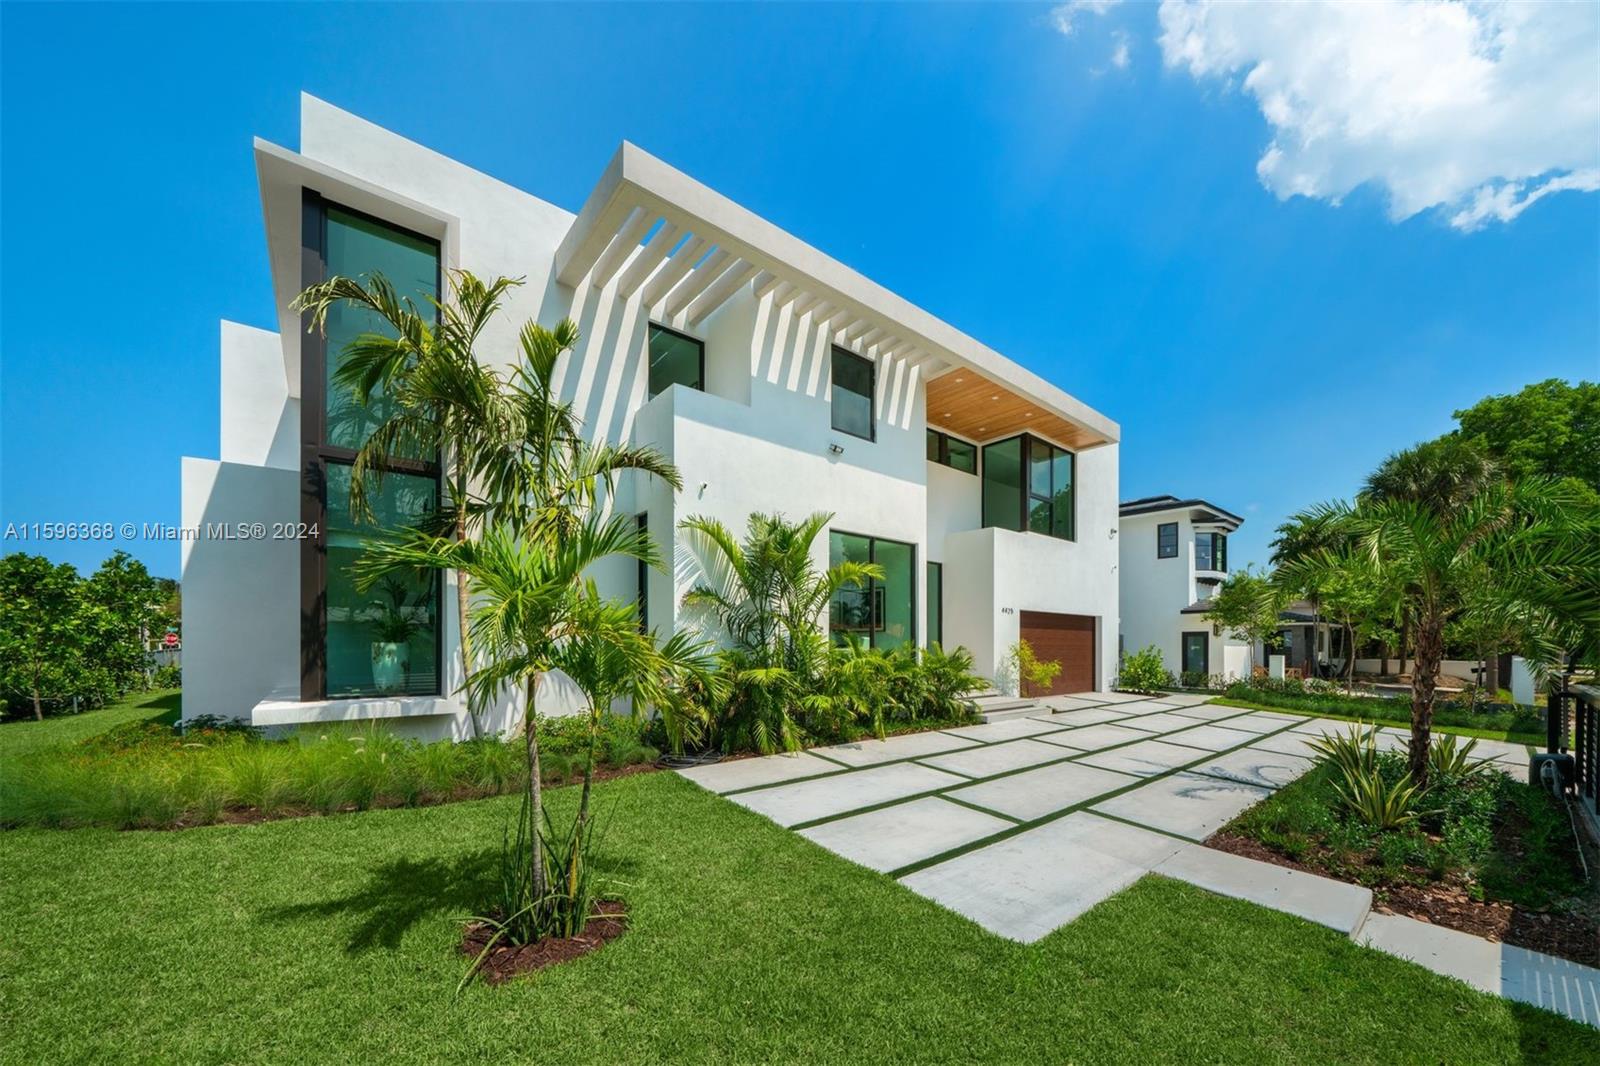 Introducing a stunning, just completed 6 bed, 6.5 bath residence on a beautiful corner lot in Miami Beach. This brand new home features soaring 21 ft ceilings in the living room, elegant Italian porcelain flooring, and a kitchen with quartz countertops and top-of-the-line Subzero & Wolf appliances. The Primary Bedroom showcases two private balconies, his & her closets, and a spacious bathroom. Additionally there are five bedrooms with ensuite bathrooms offering comfort and privacy. Outside, indulge in the saltwater pool, hot tub, and Italian porcelain decking. With a 5-car driveway and 2-car garage, this property offers both ample space and convenience. Enjoy proximity to top-rated schools, the beach, and 41st street shops and restaurants from this exquisite home.